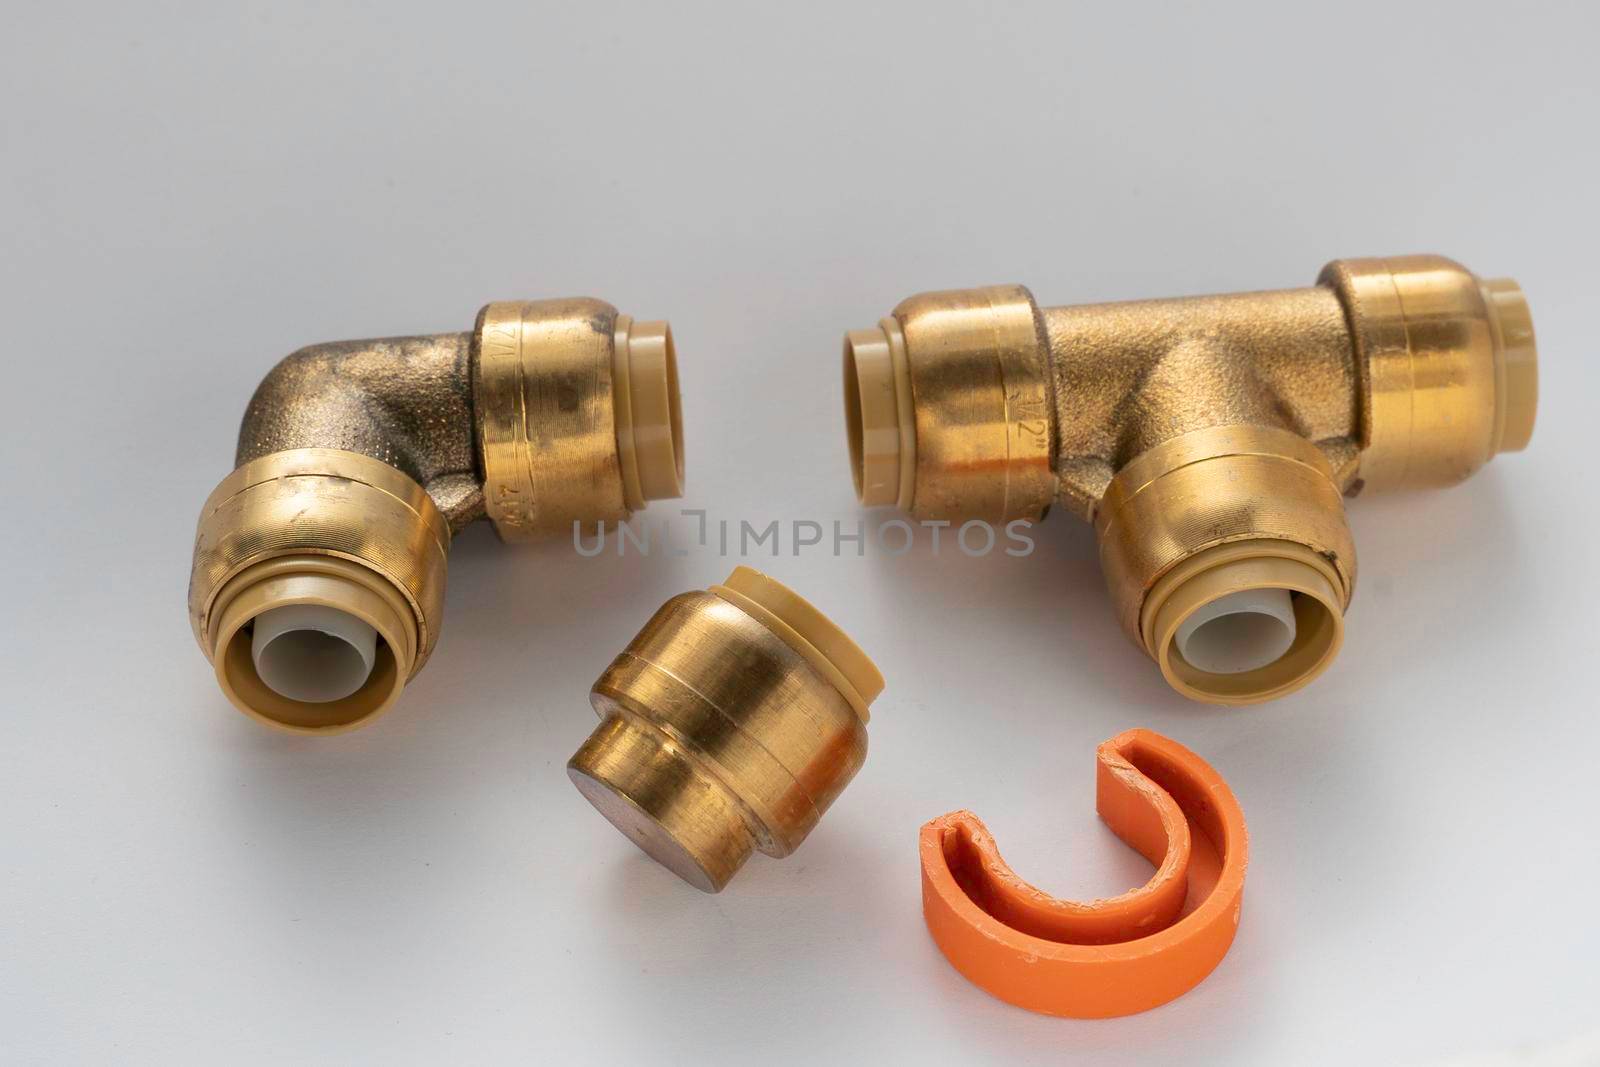 Bronze fittings for water connection by ben44